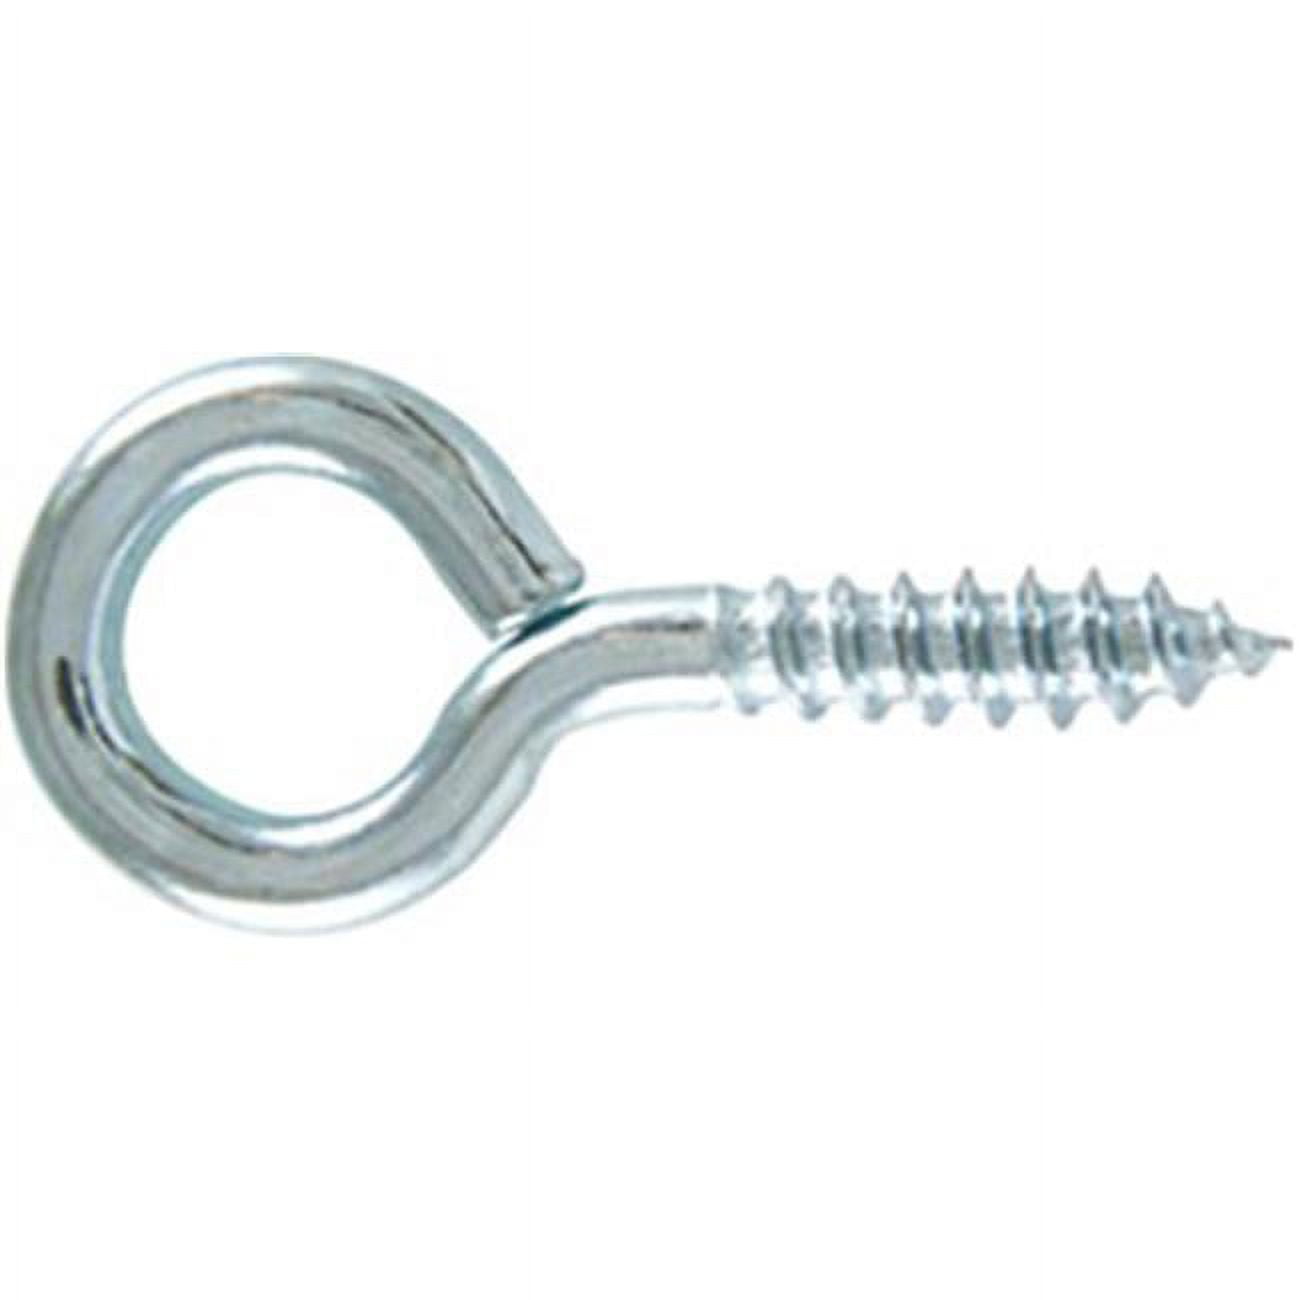 61519 Stainless Steel With A Large Eye Screw - 0.162 X 1.62 X 0.46 In.